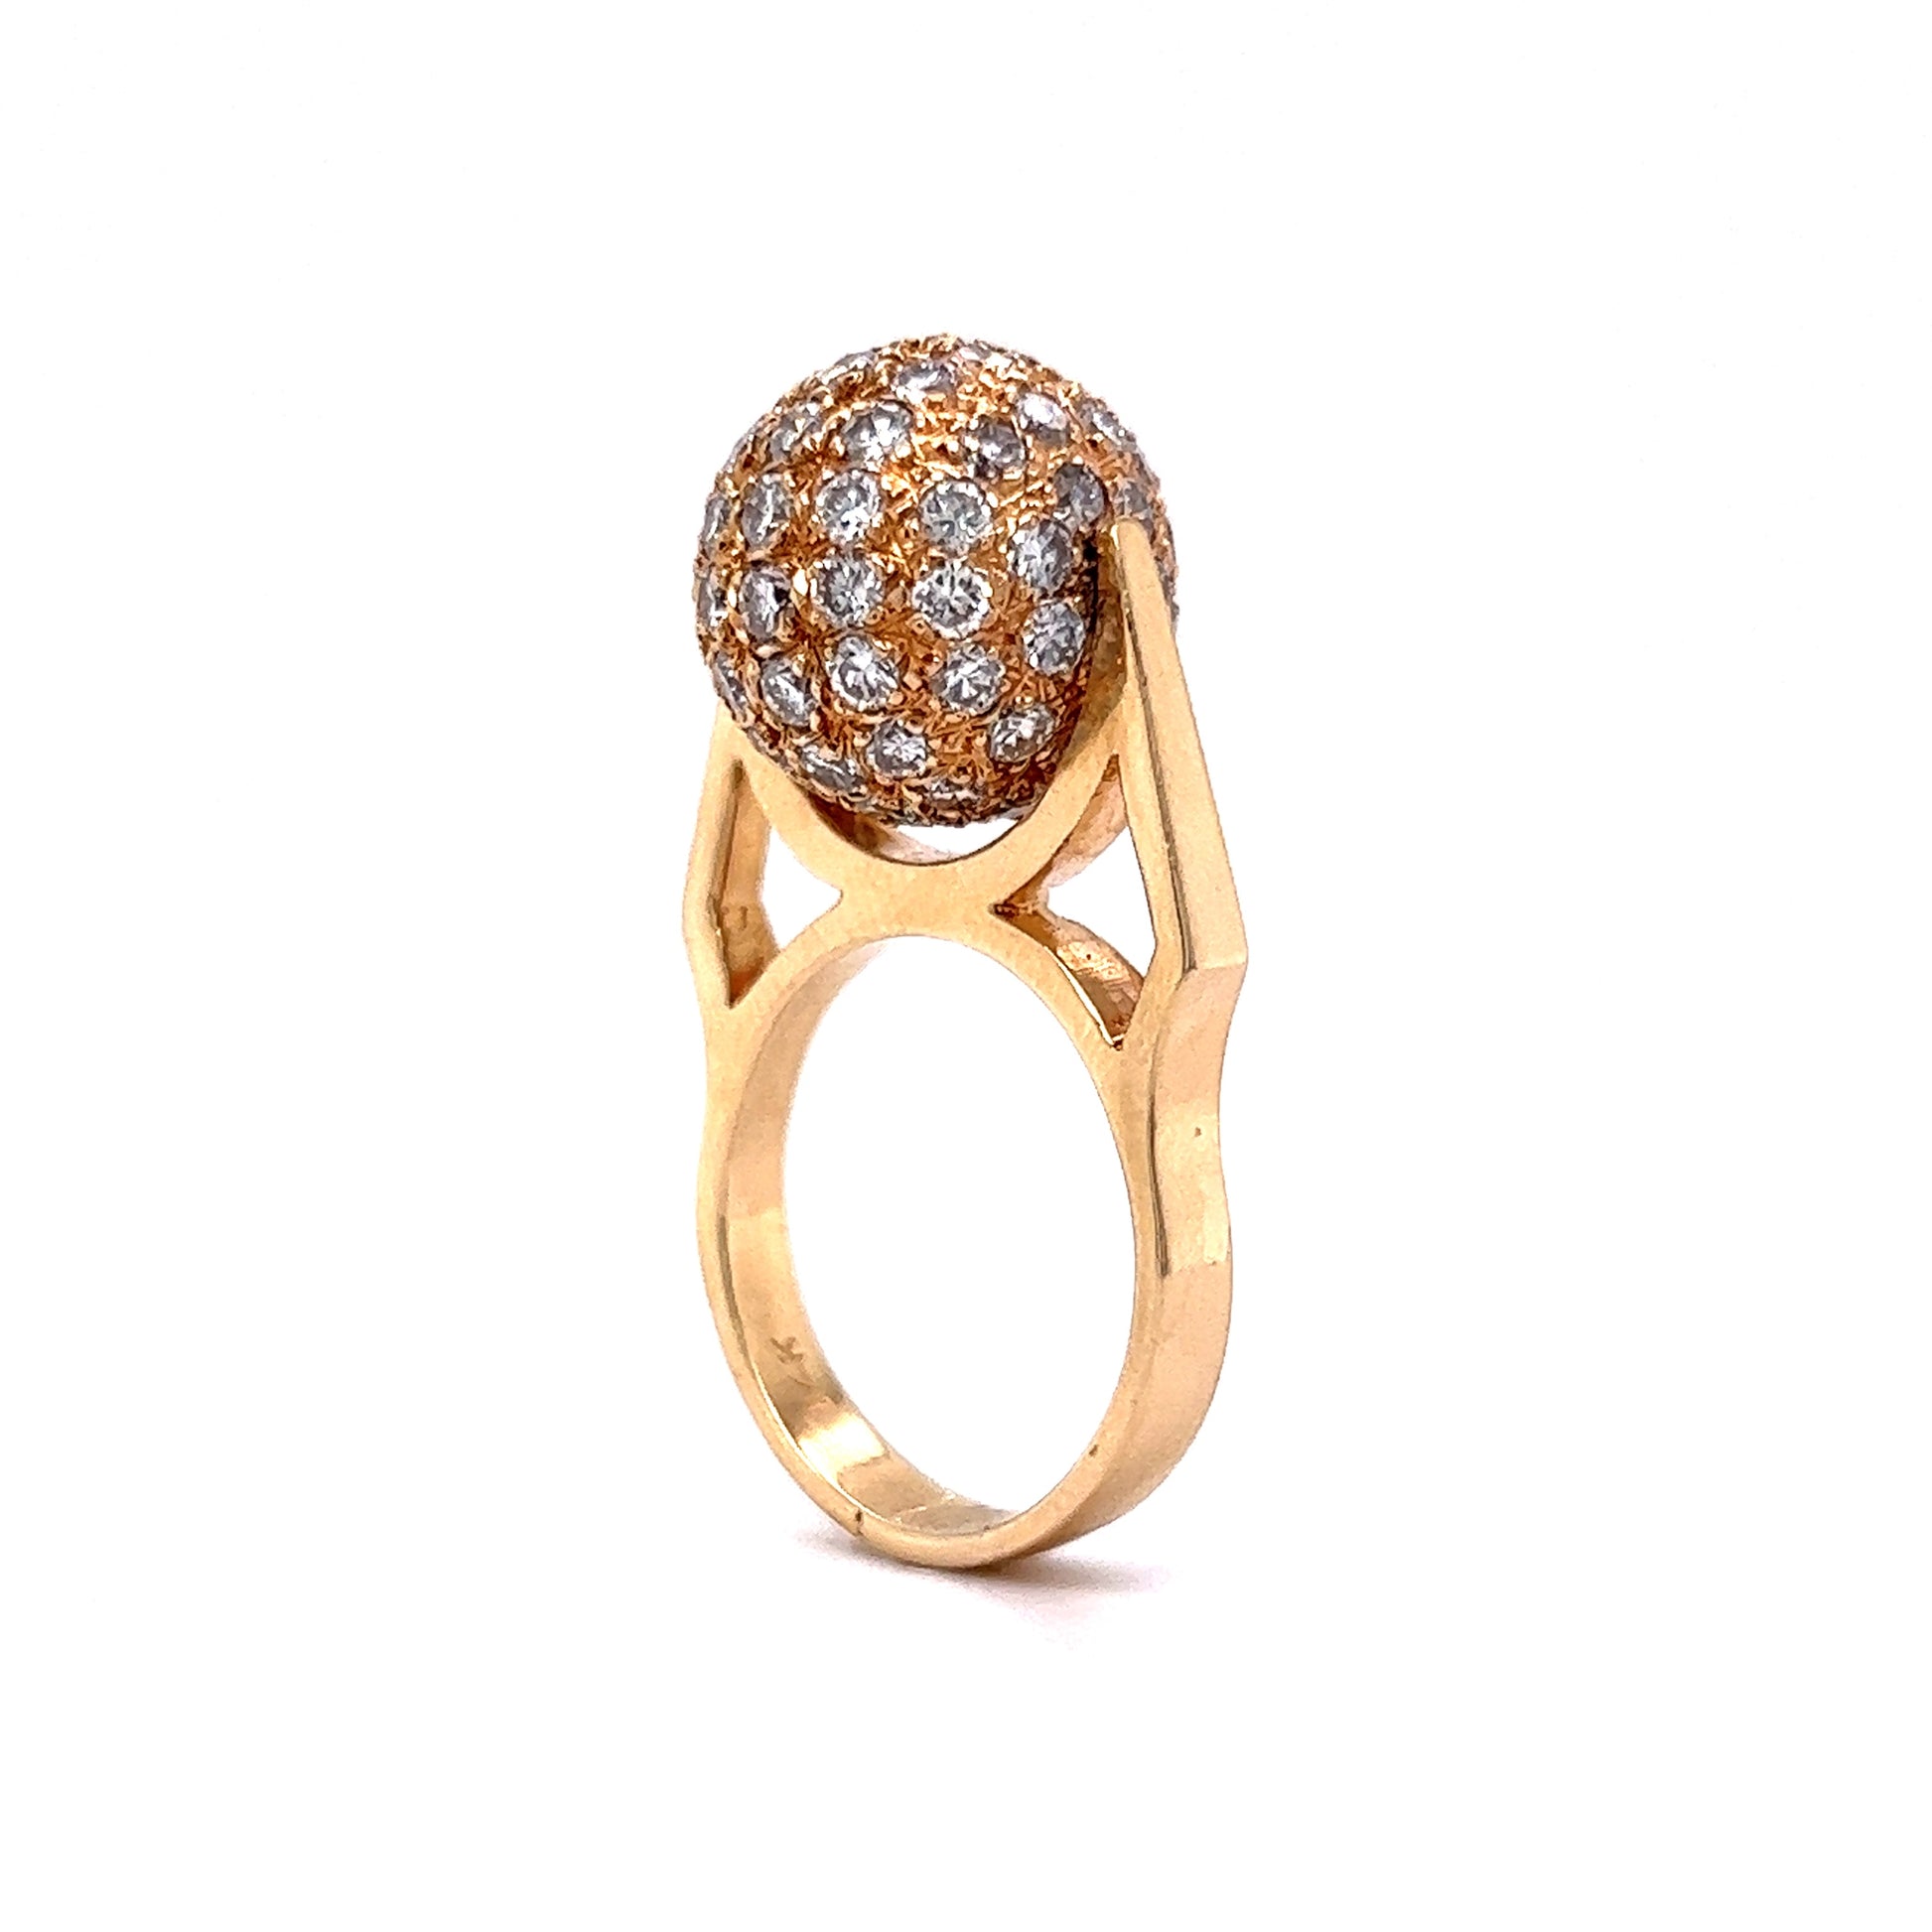 Diamond Spinner Cocktail Ring 14k Yellow GoldComposition: 14 Karat Yellow Gold Ring Size: 7 Total Diamond Weight: 2.52ct Total Gram Weight: 9.7 g Inscription: 14k
      